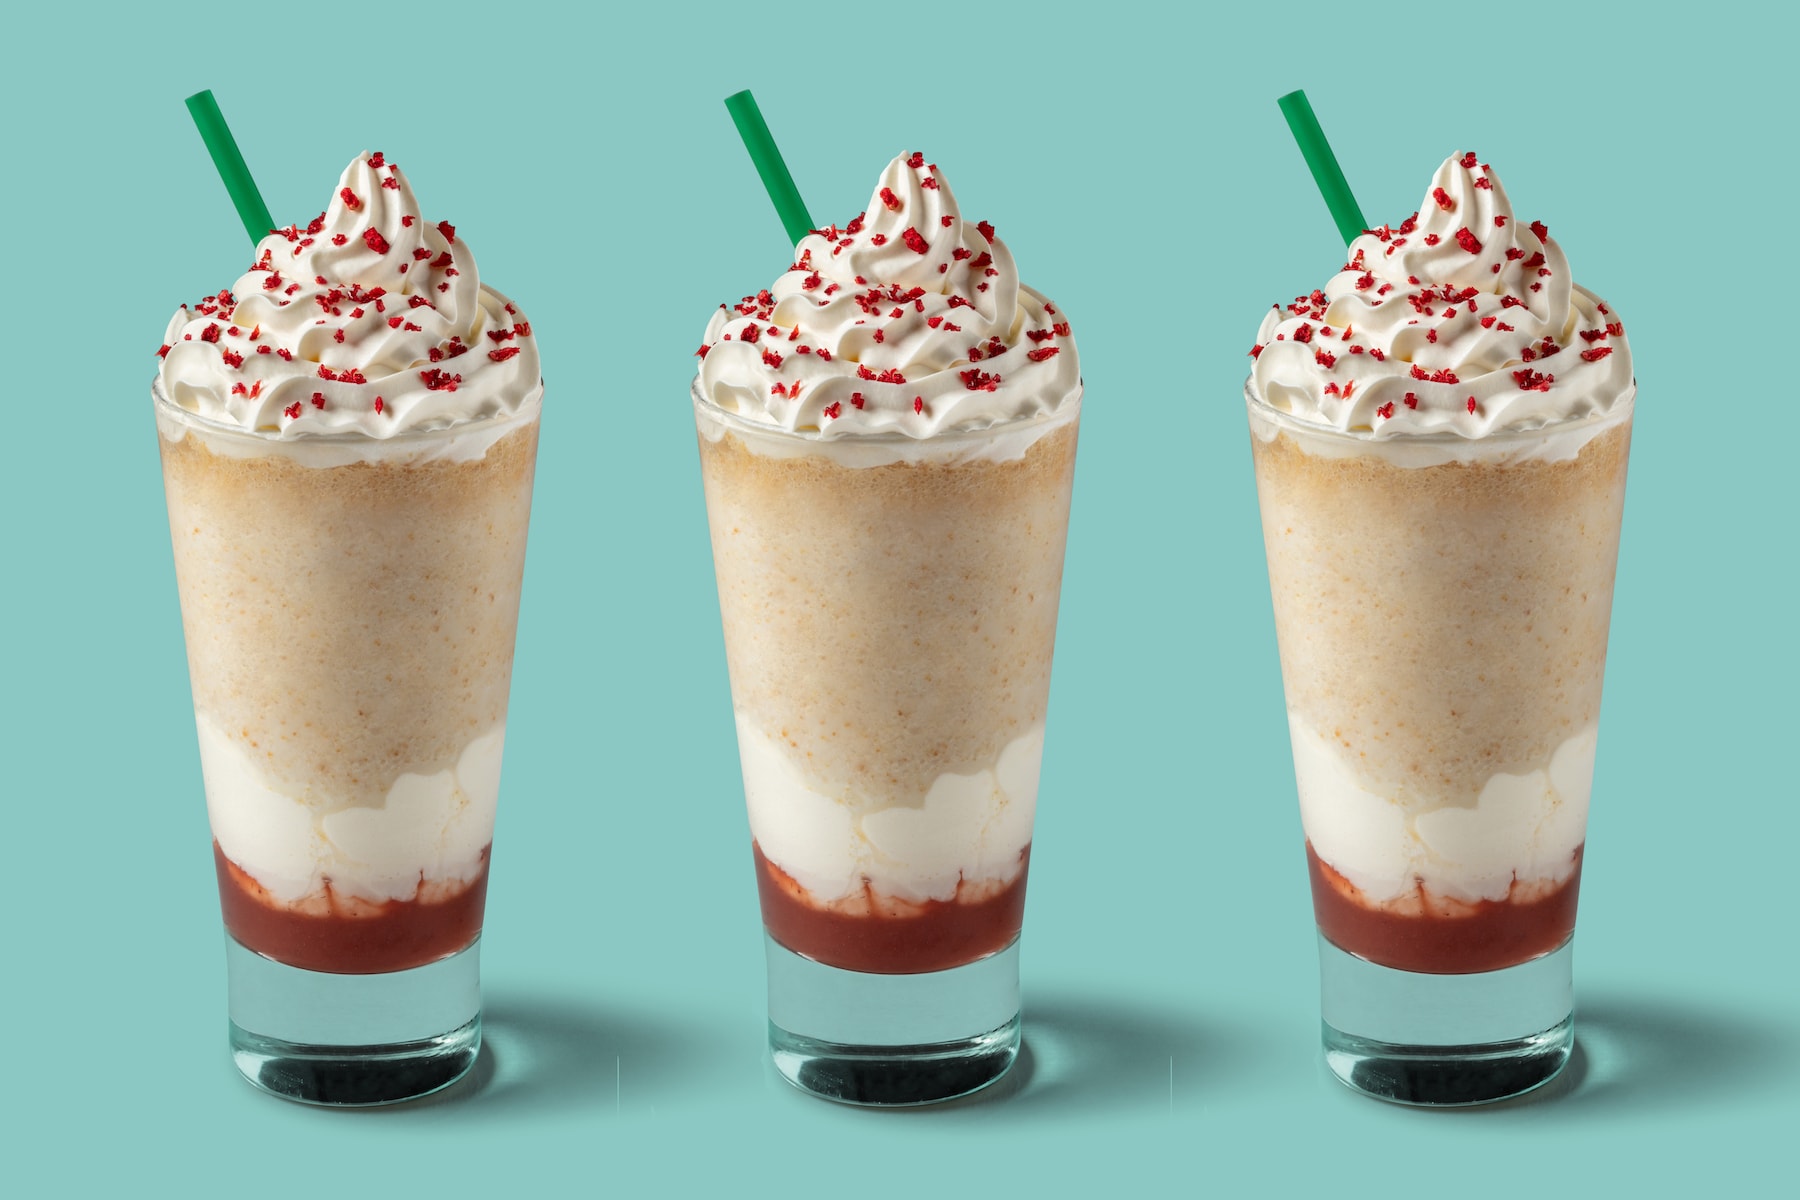 Starbucks Strawberry Donut Frappuccino Release Drink Cookies and Cream UK London Stores Exclusive Summer Flavor